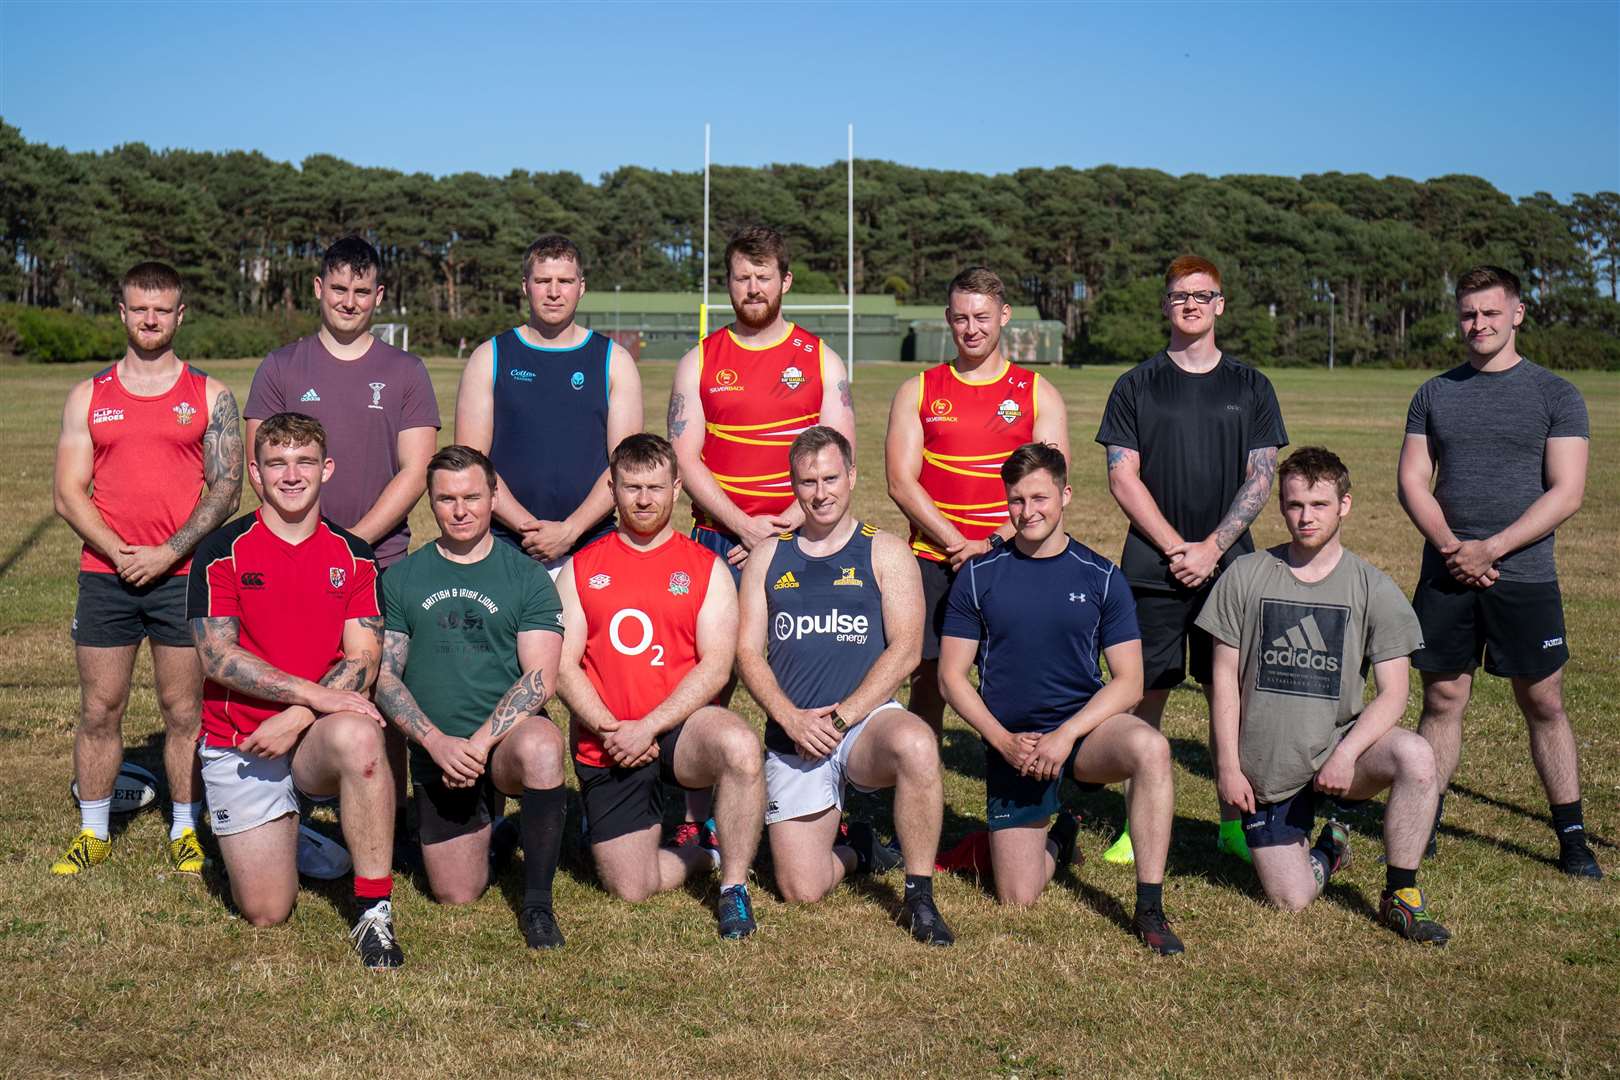 Some of the RAF Lossiemouth squad who are taking part in a world record attempt for longest game of Touch Rugby